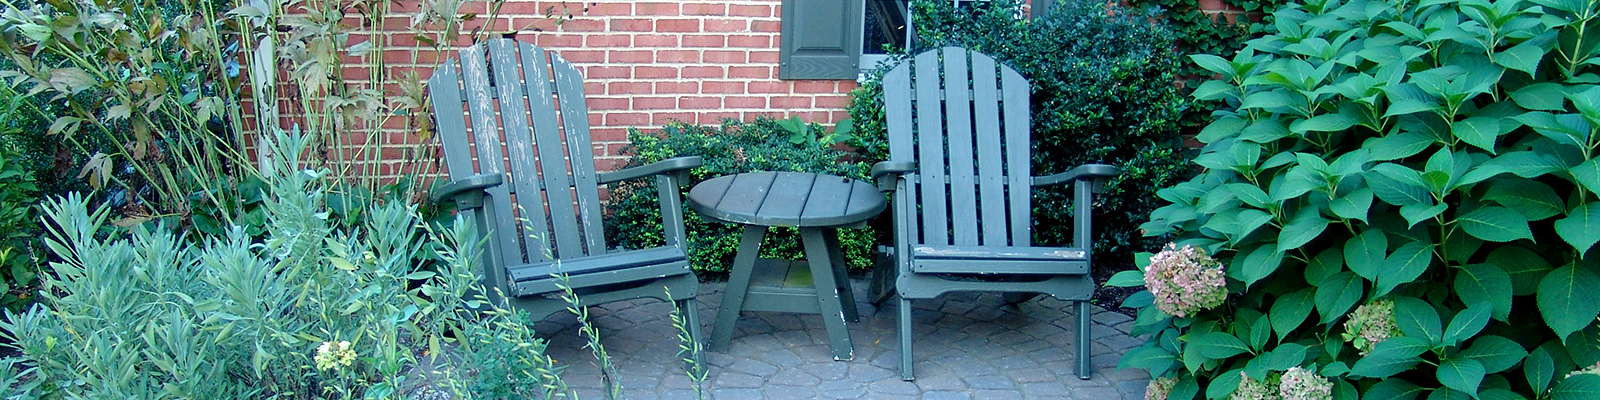 Outdoor chairs on landscaped patio